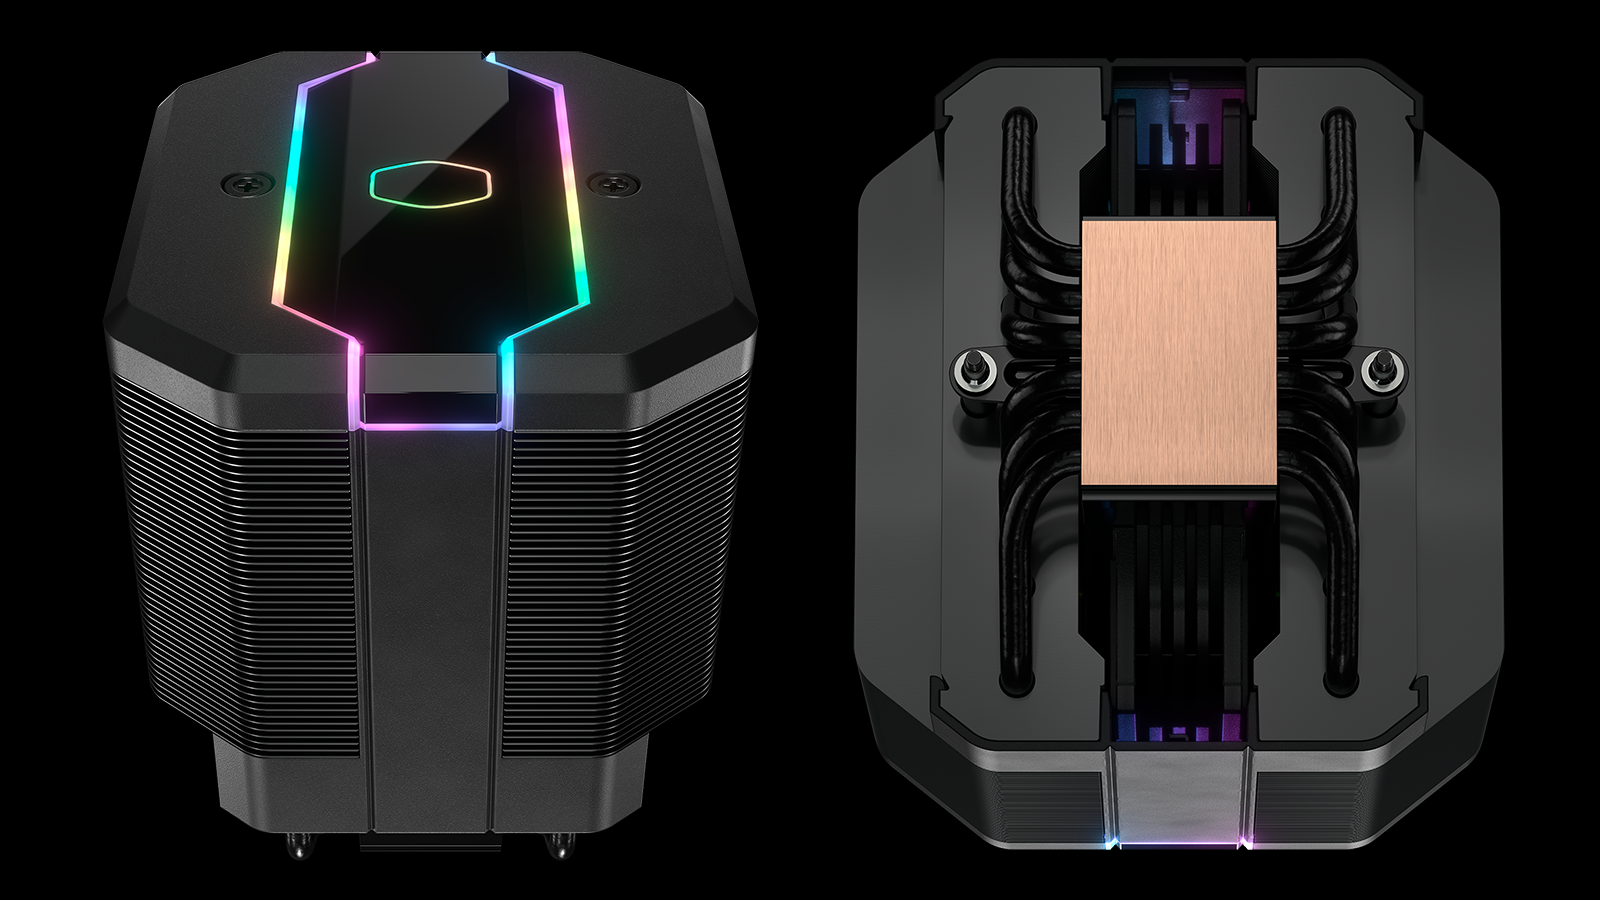 Cooler Master's MA620M Is ARGB Shrouded in Secrecy | Tom's Hardware